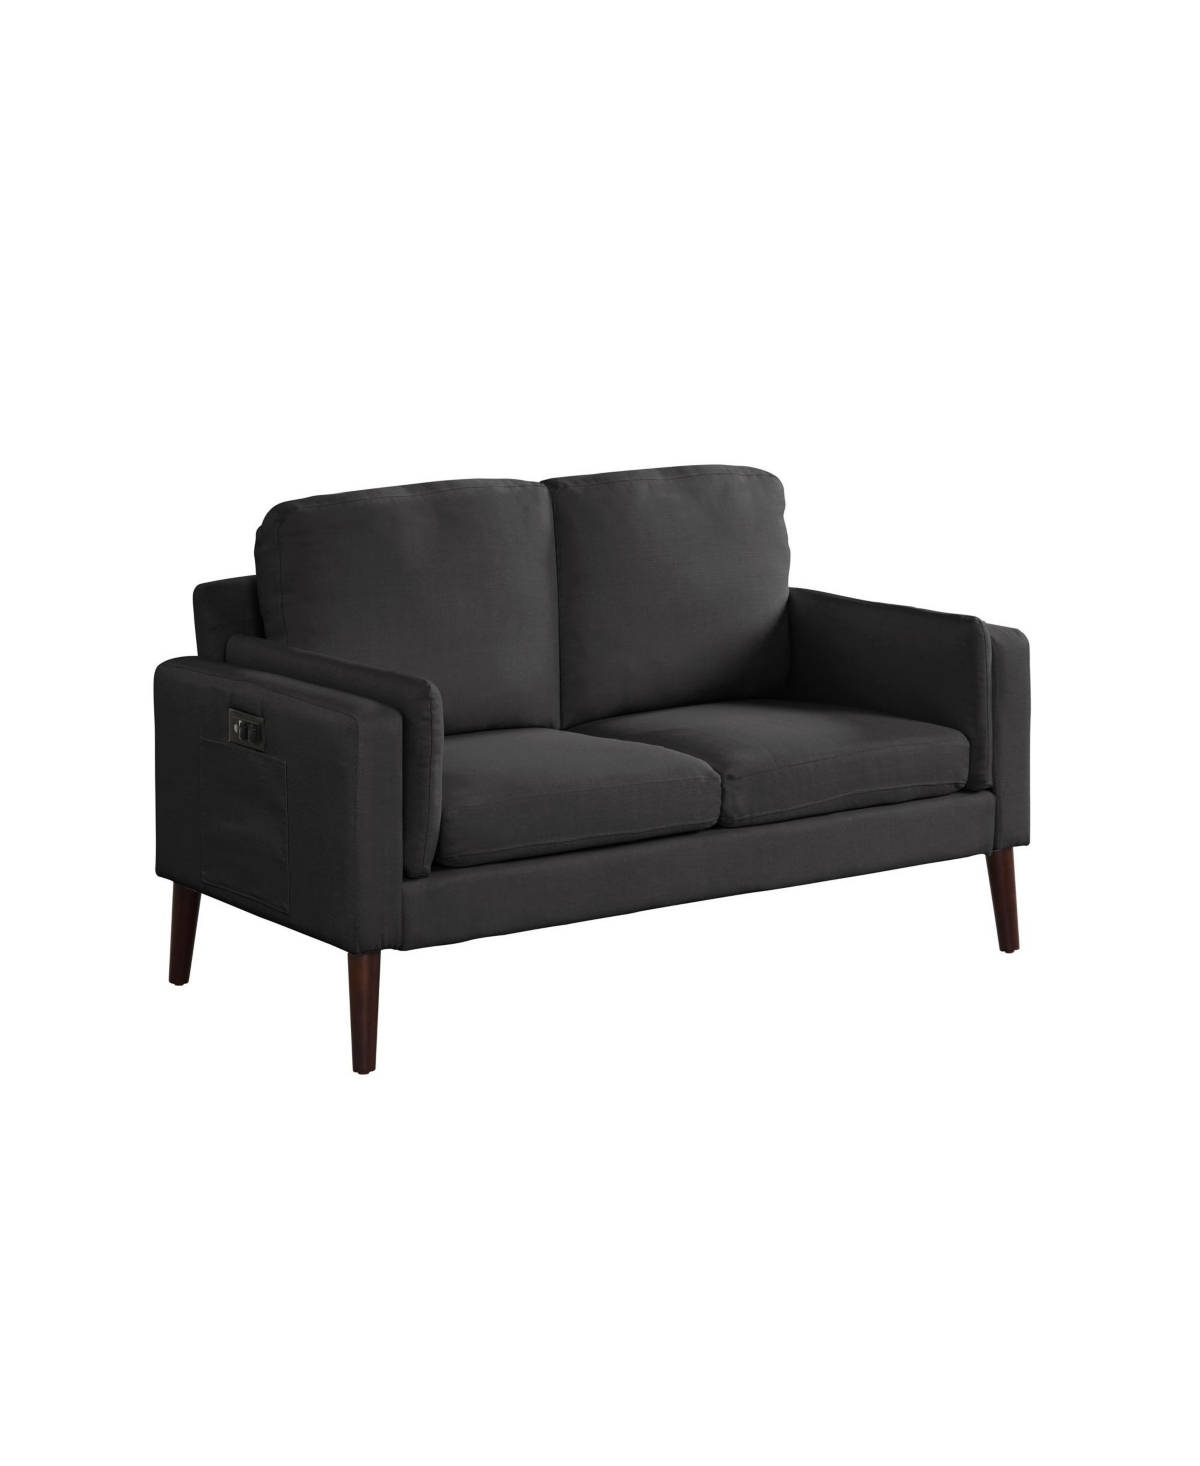 Lifestyle Solutions 35" Wood, Steel, Foam And Polyester Nate With Power And Usb Ports Loveseat In Black